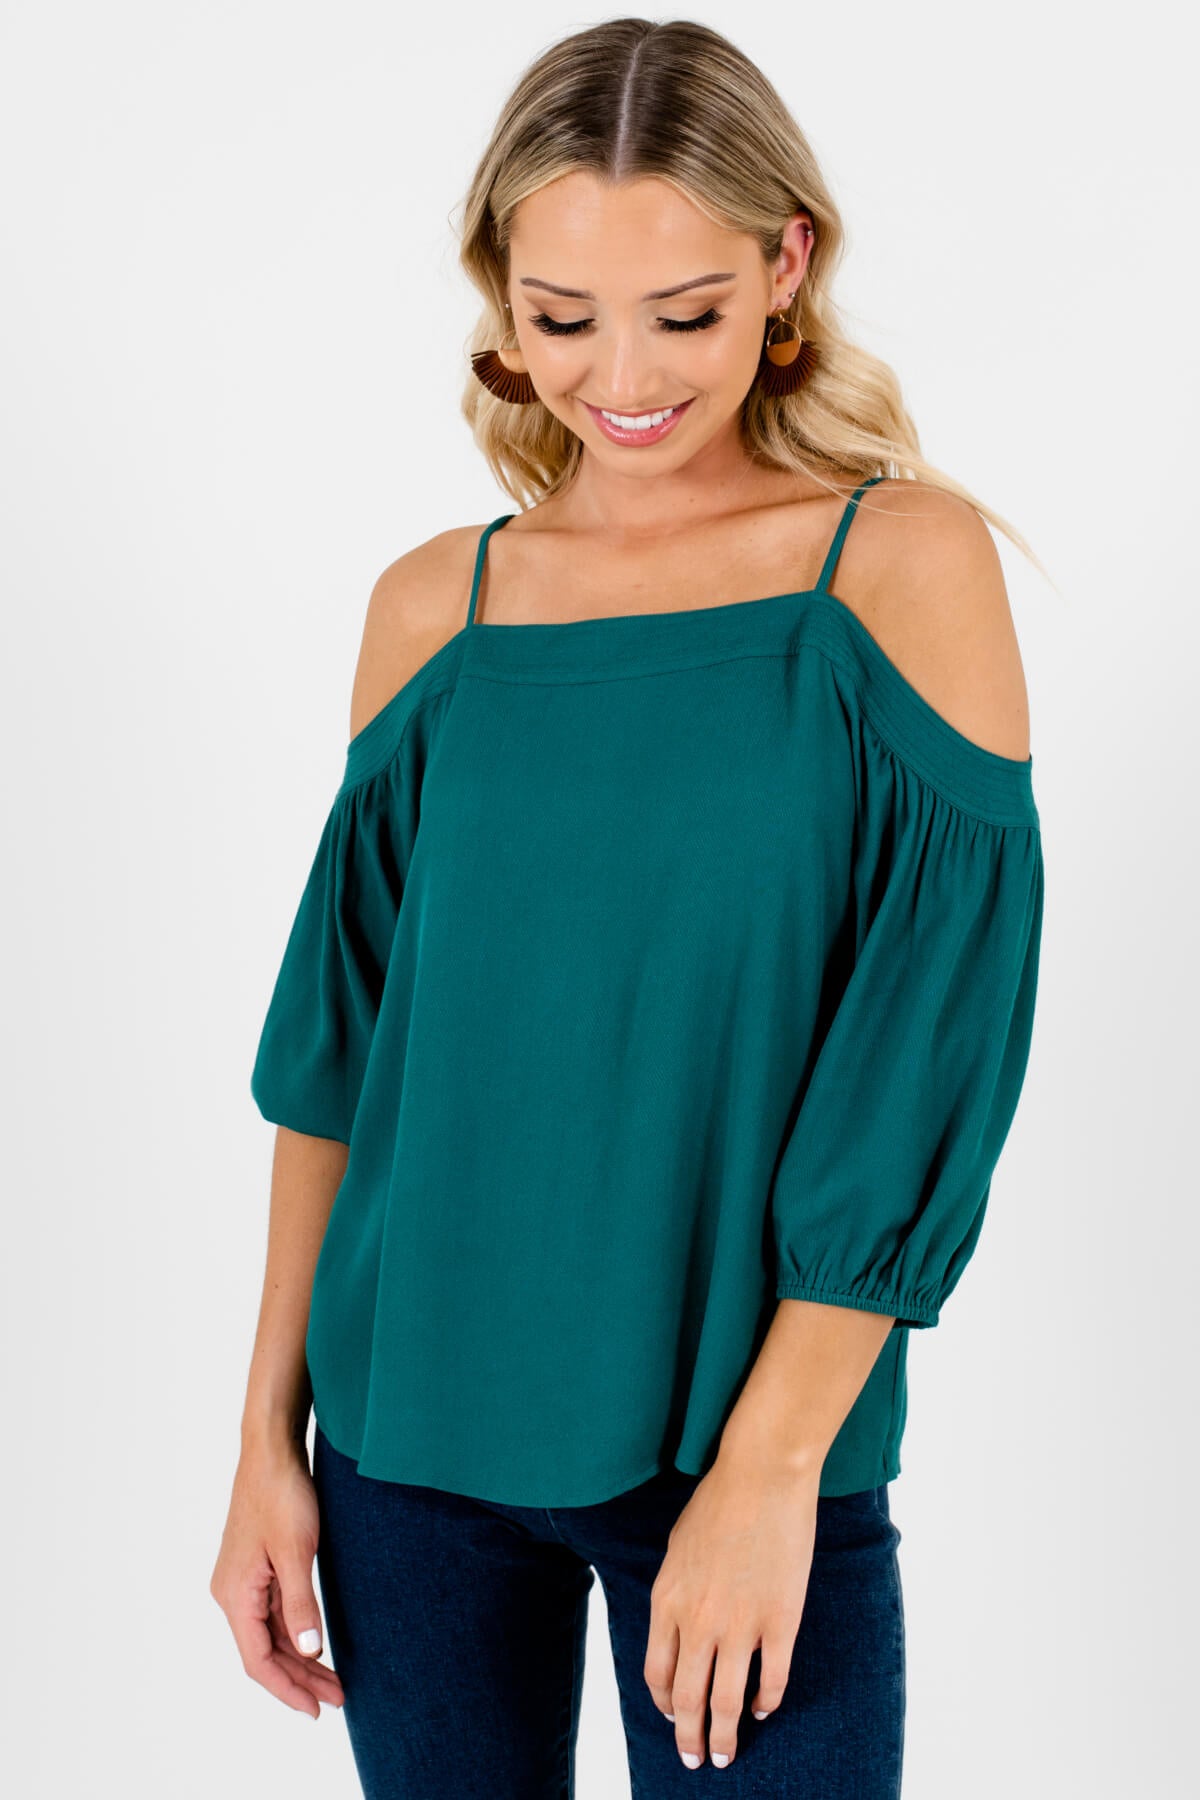 Teal Green Cute and Comfortable Boutique Tops for Women